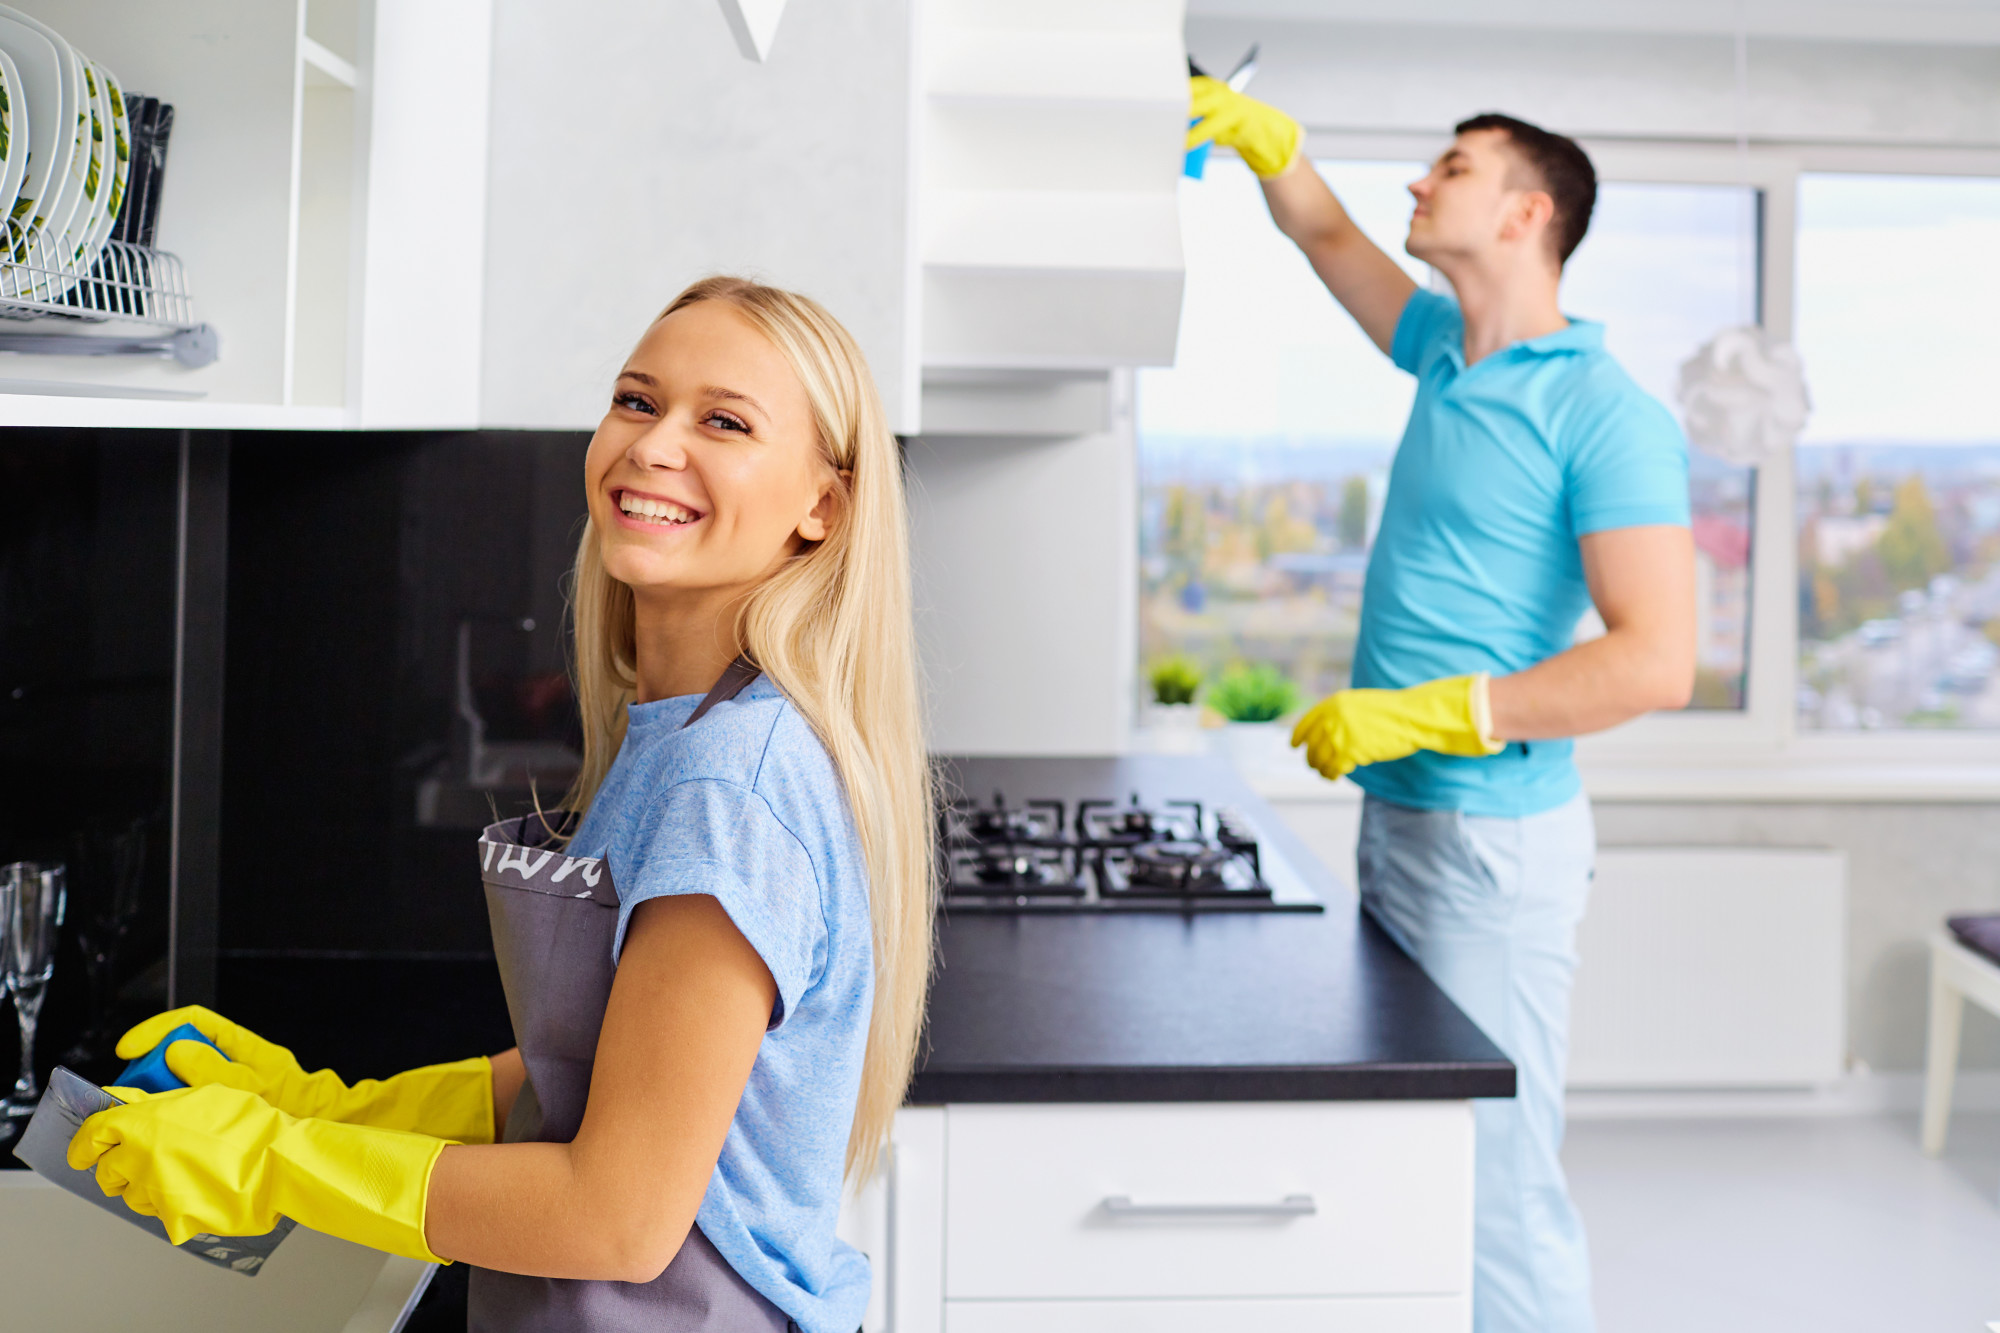 Don't Make These Bond Cleaning Mistakes - A Guide